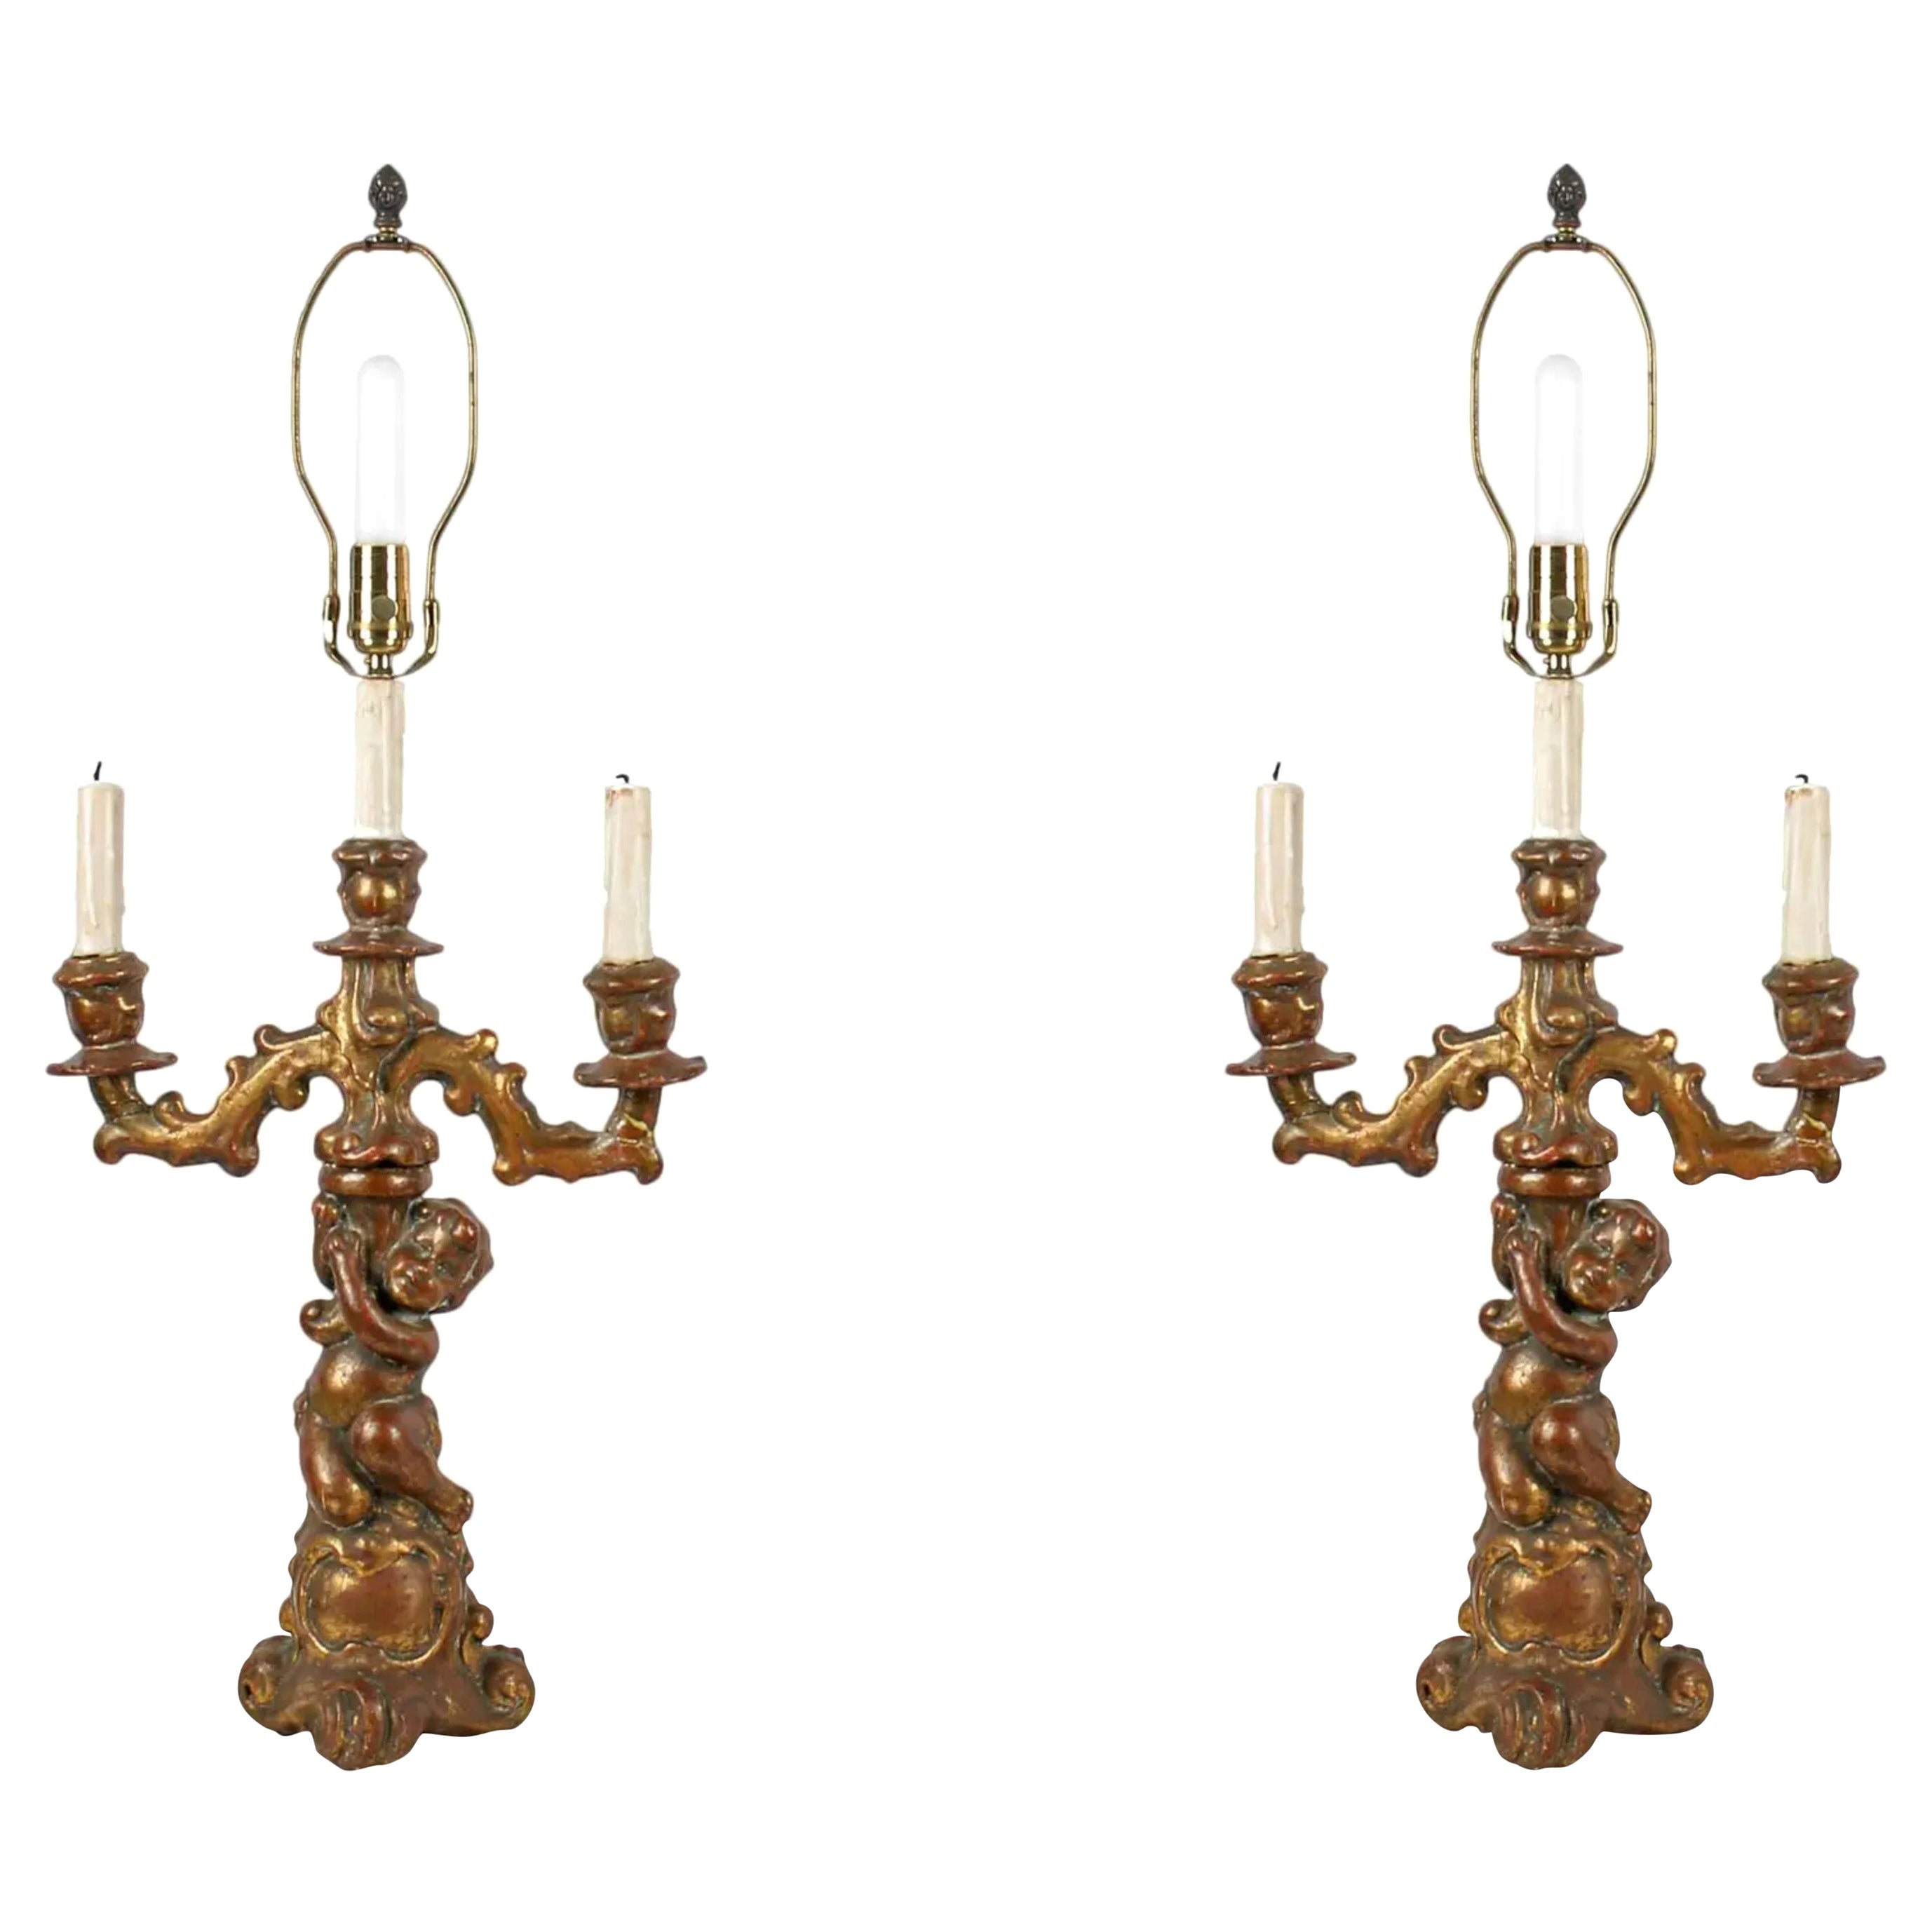 Pair of Antique Figural Nude Putti Gilt Wood Candelabra Table Lamp